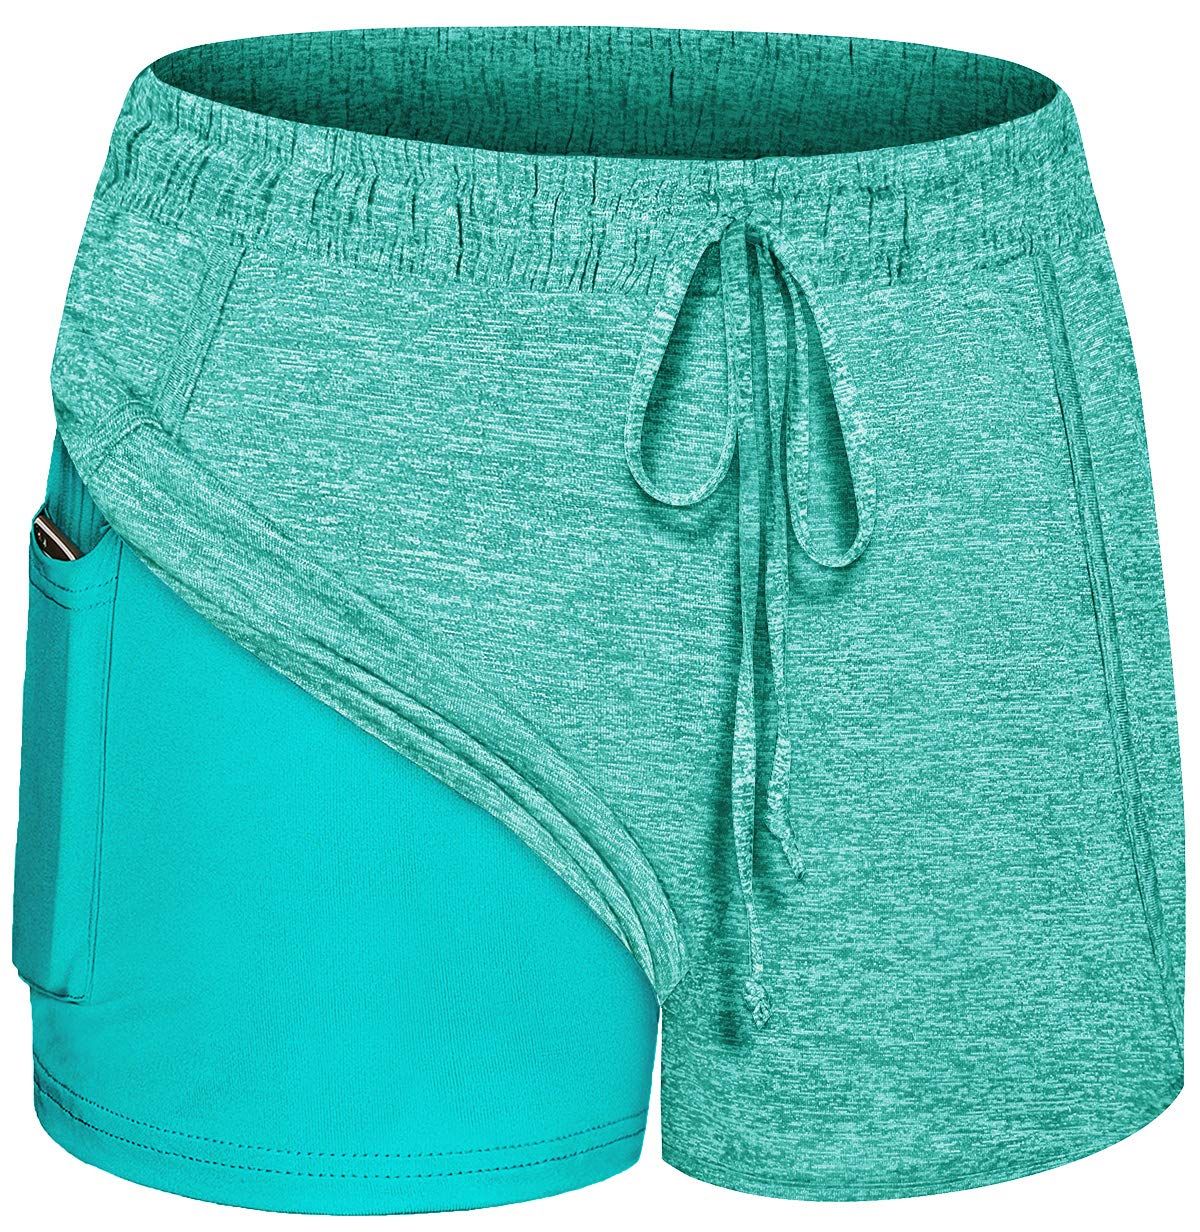 Blevonh Women Yoga Running Shorts 2 in 1 Workout Athletic Shorts with Pockets S-3XL | Amazon (US)